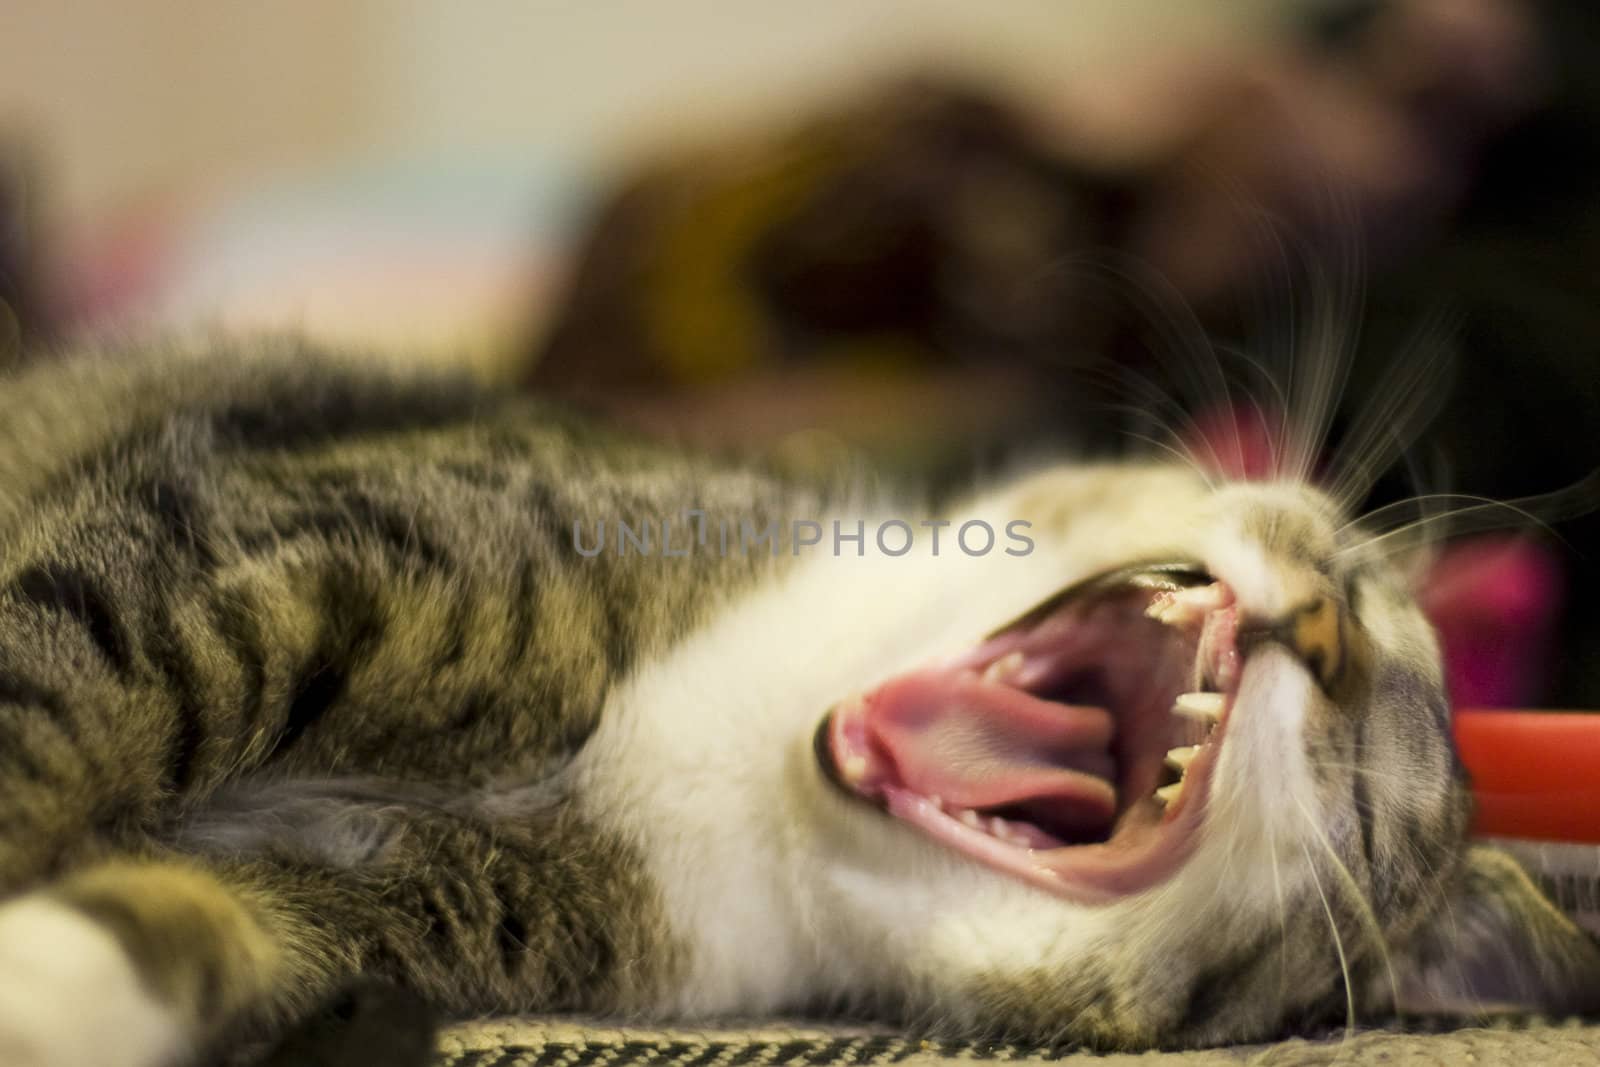 A cat yawning wit his big mouth open